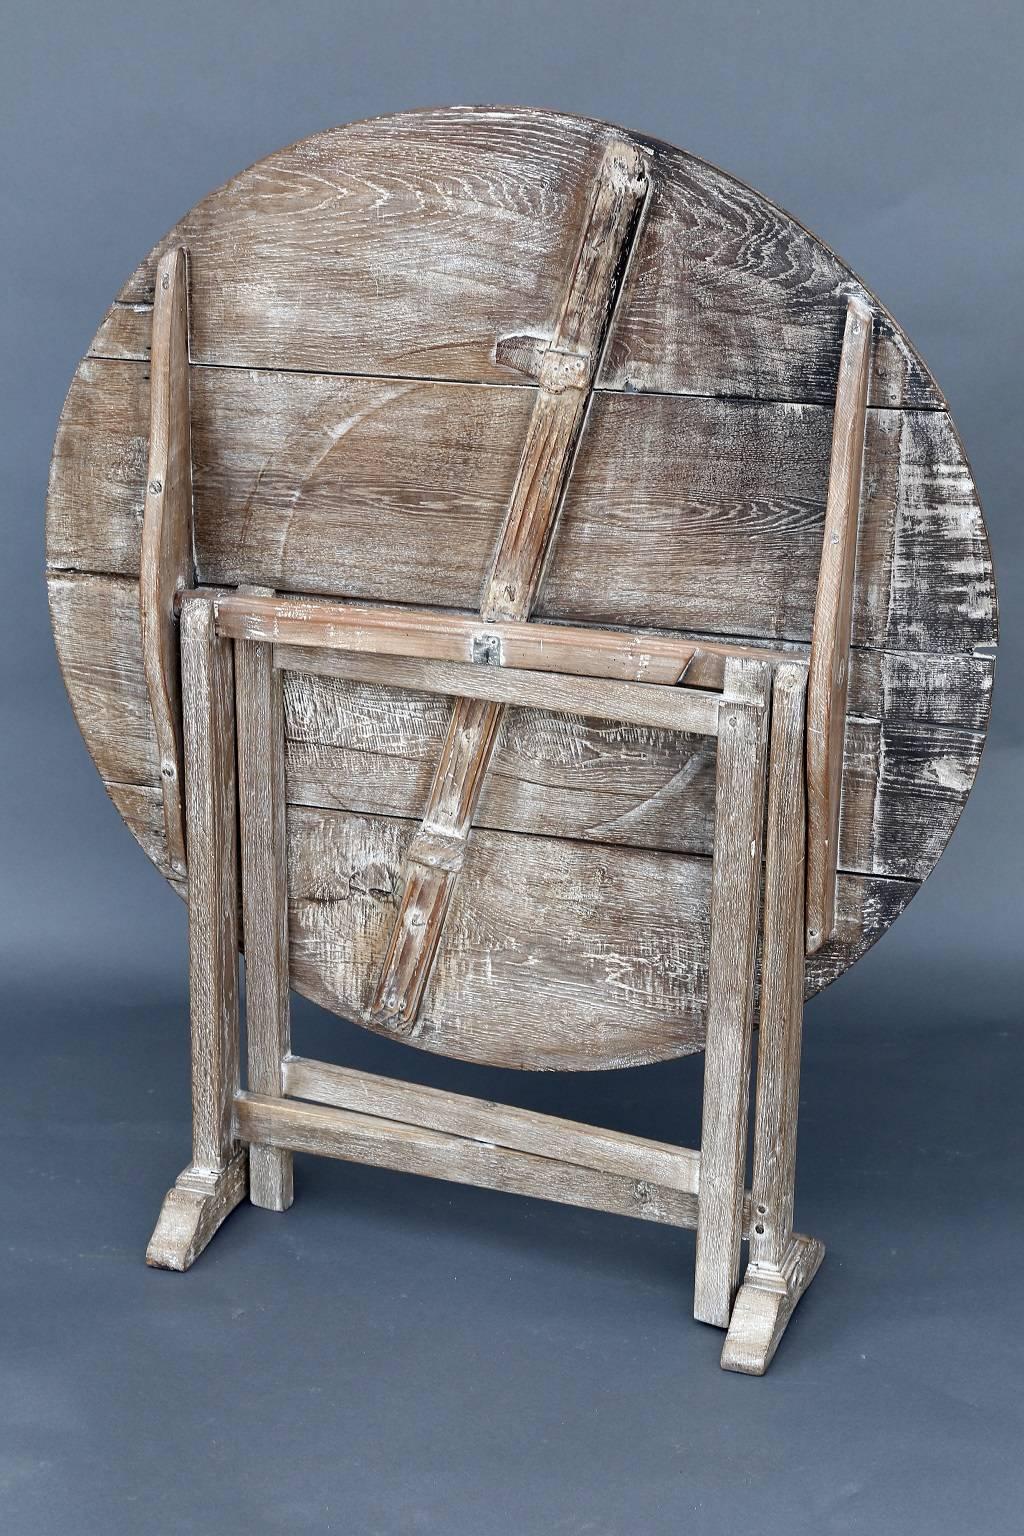 19th century French wine tasting table with a grained grayish-brown patina and remnants of white wash paint. The top that can be positioned vertically for storage, and open flat this table is perfect for a small nook or as a charming end table.